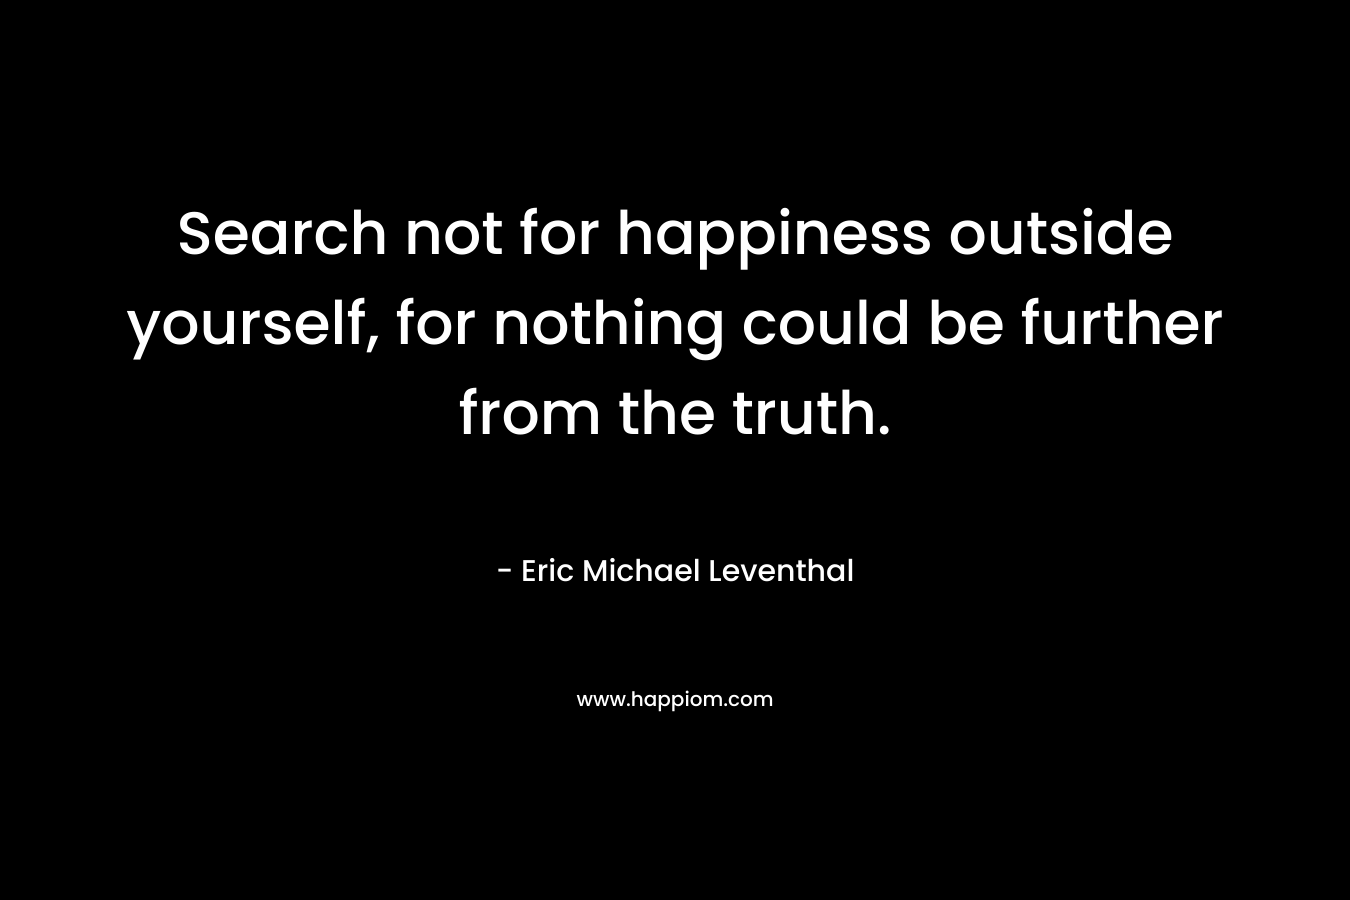 Search not for happiness outside yourself, for nothing could be further from the truth.